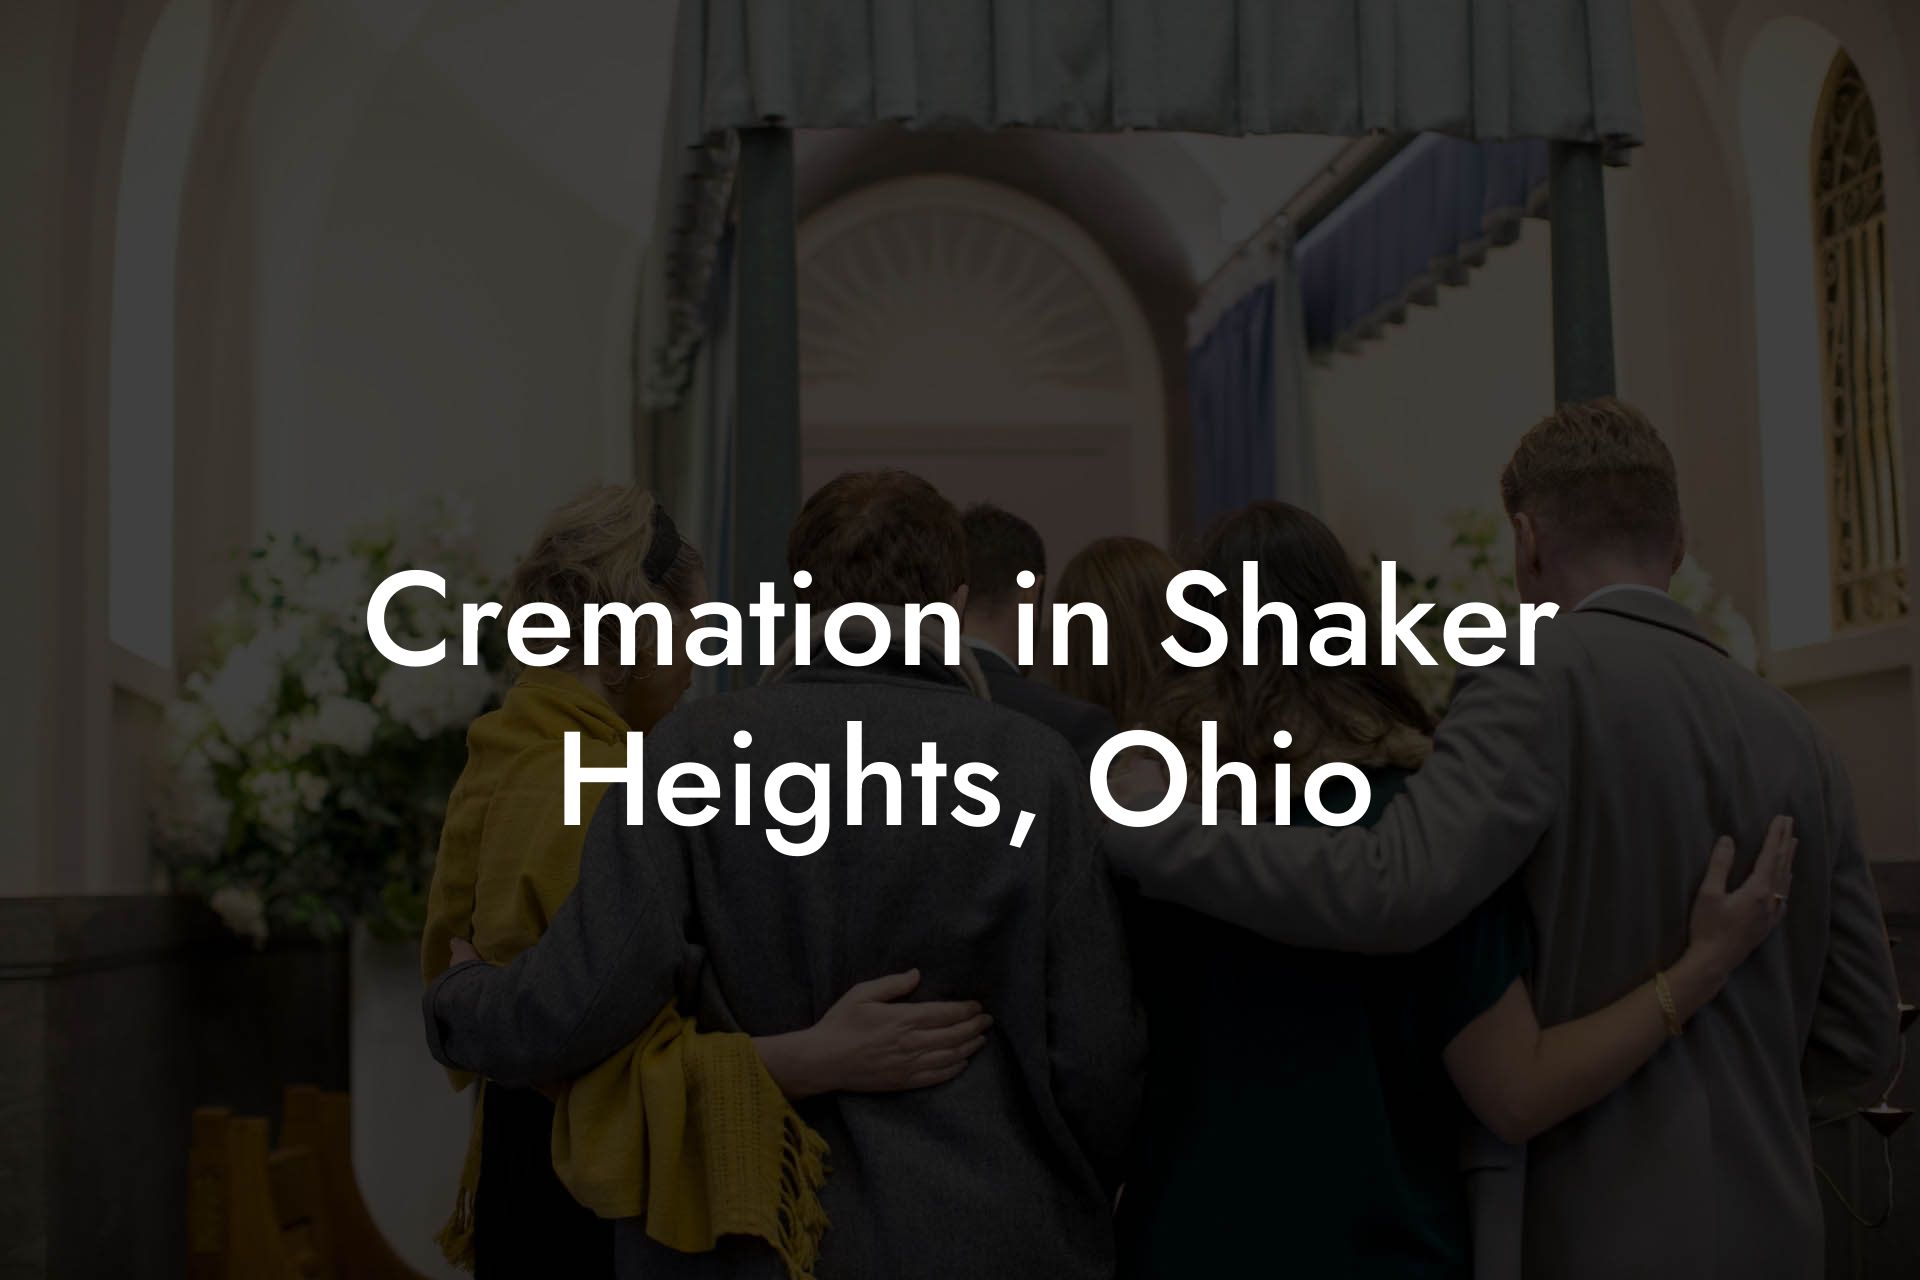 Cremation in Shaker Heights, Ohio